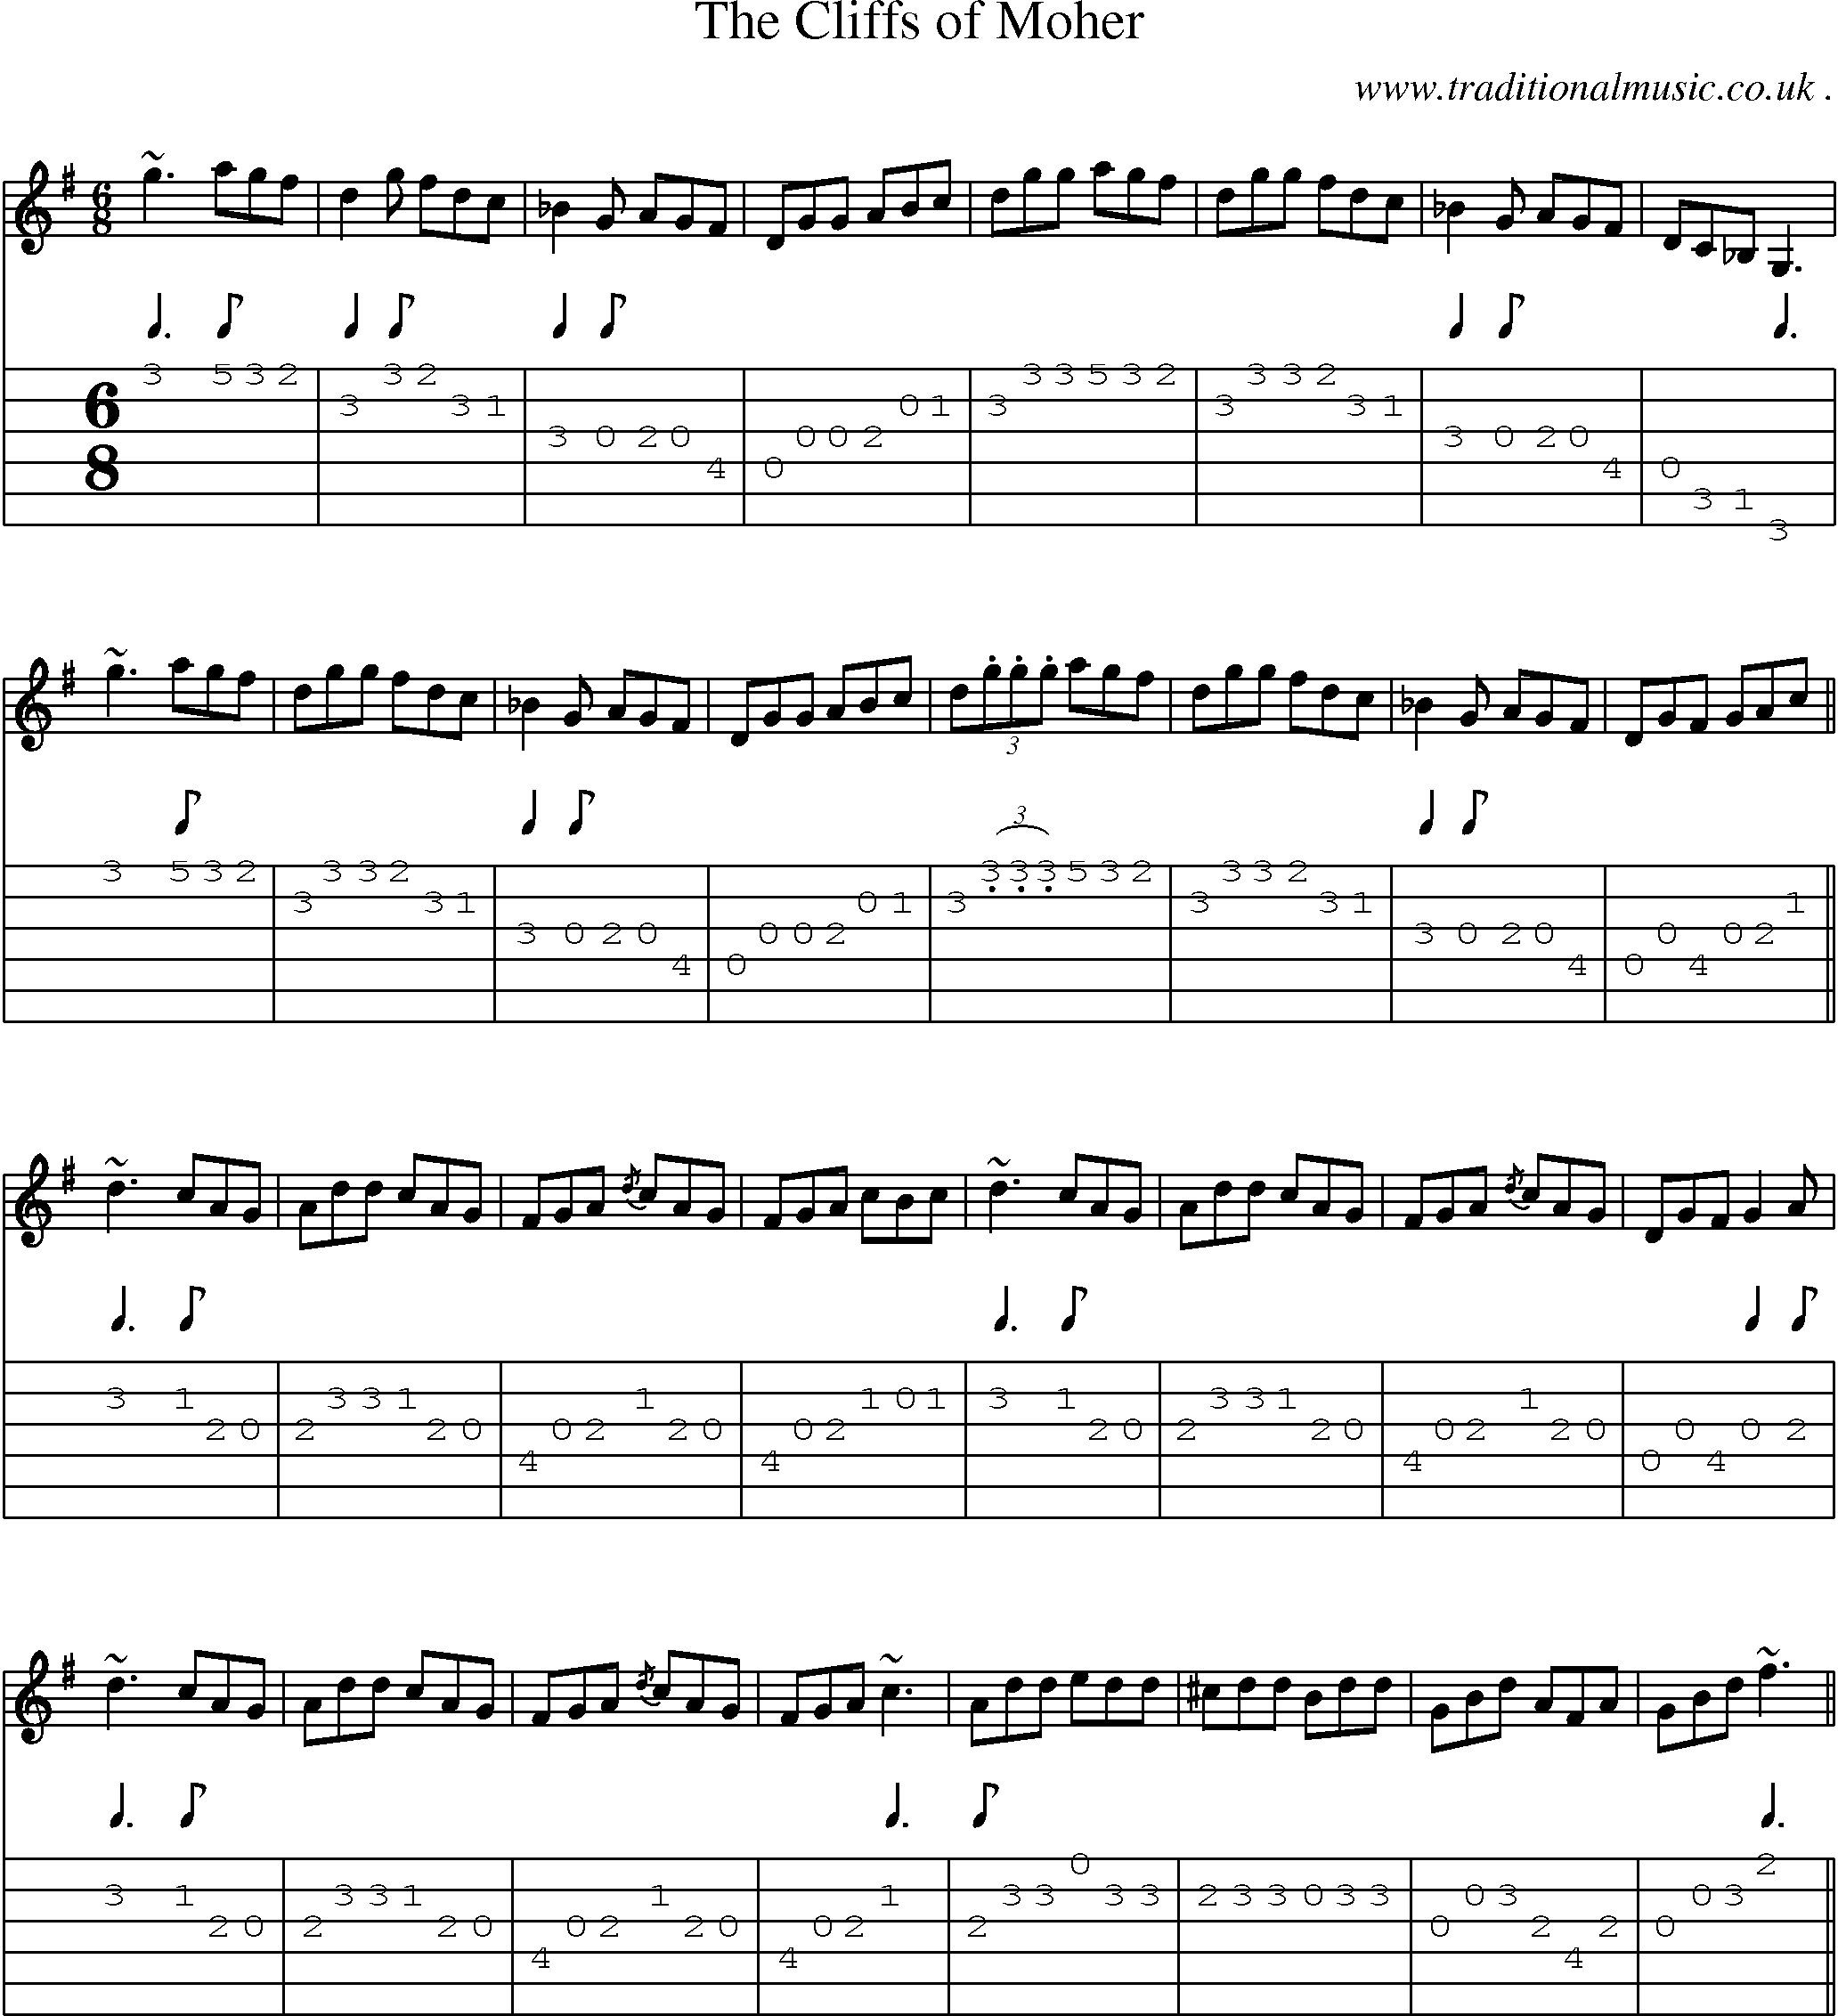 Sheet-music  score, Chords and Guitar Tabs for The Cliffs Of Moher